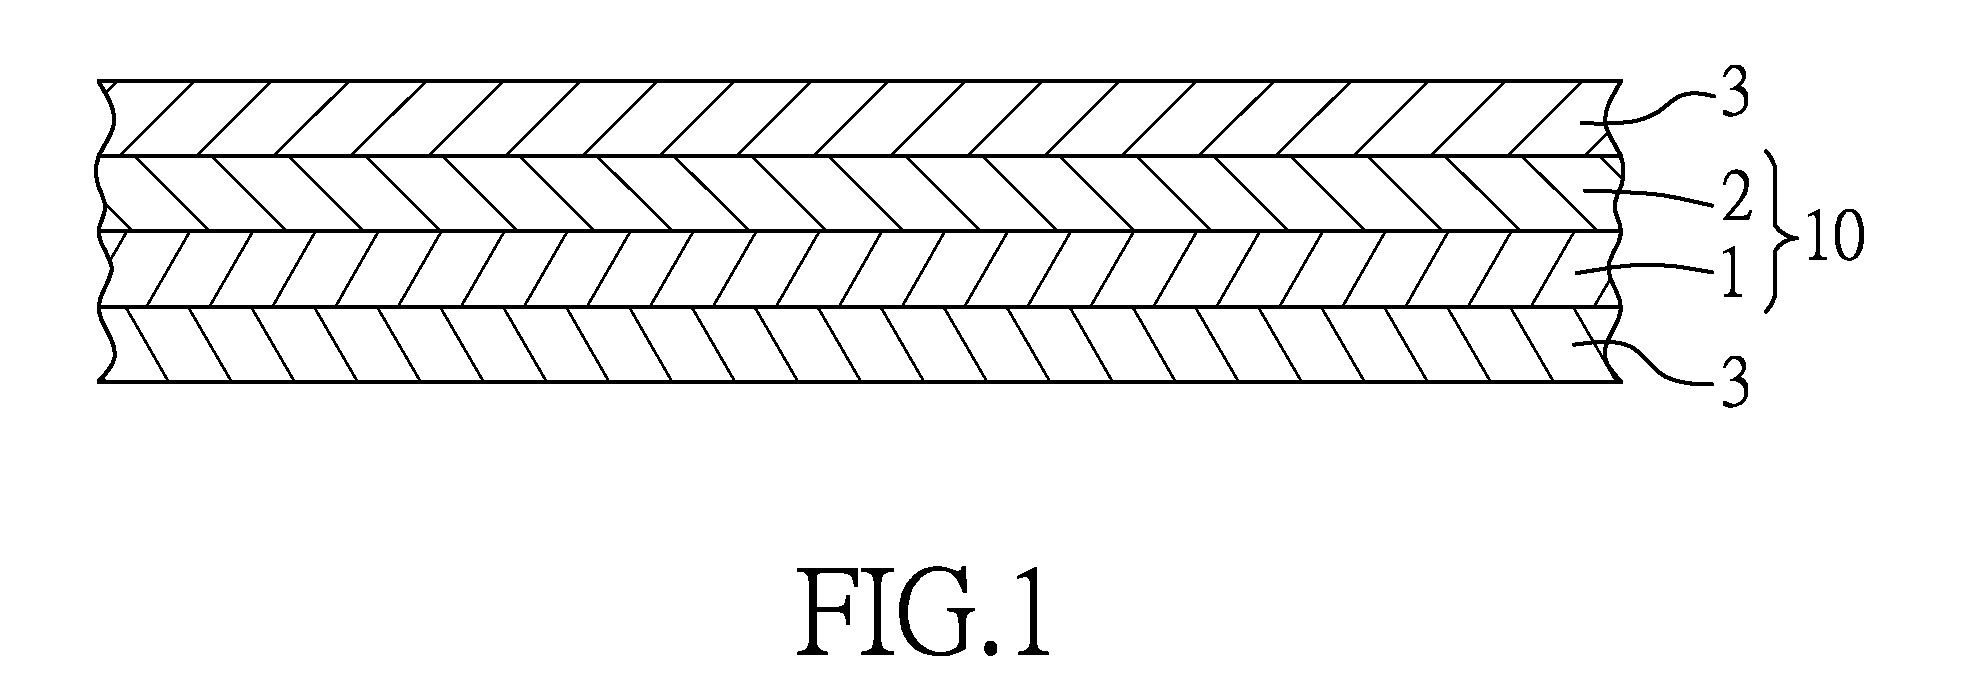 Nonwoven fabric composite and method for making the same